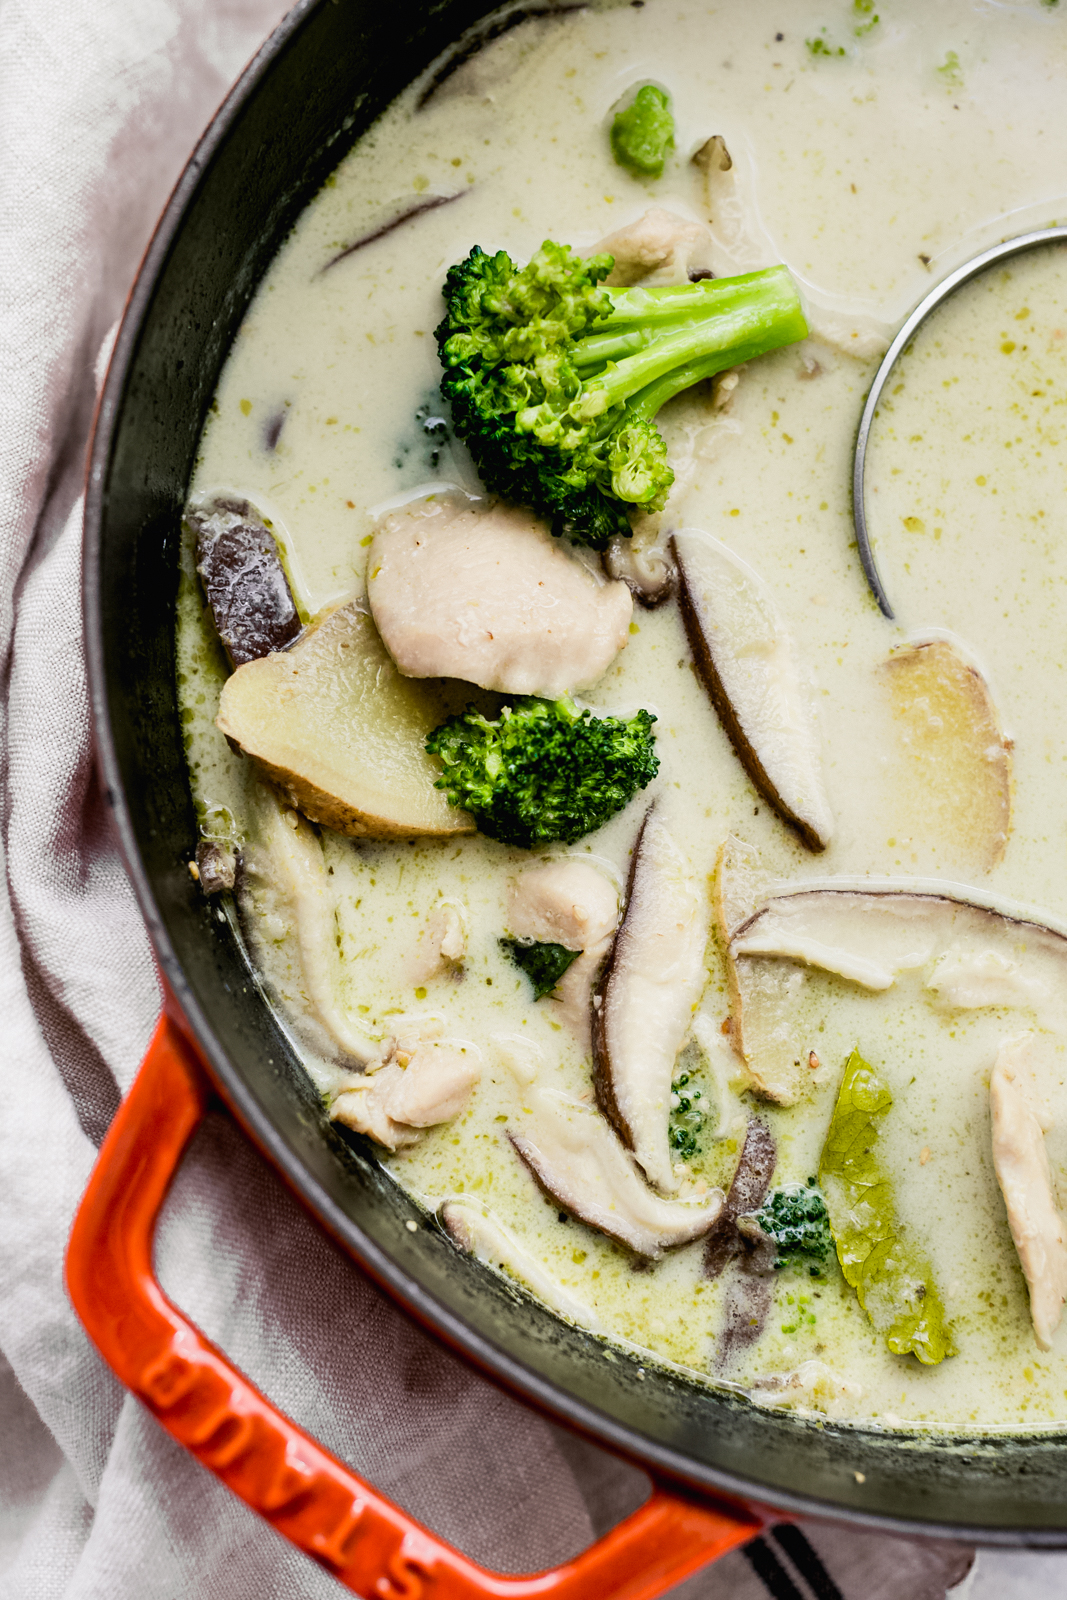 soup in cast iron pot showing slices of ginger, broccoli florets, chicken, and shiitake mushrooms